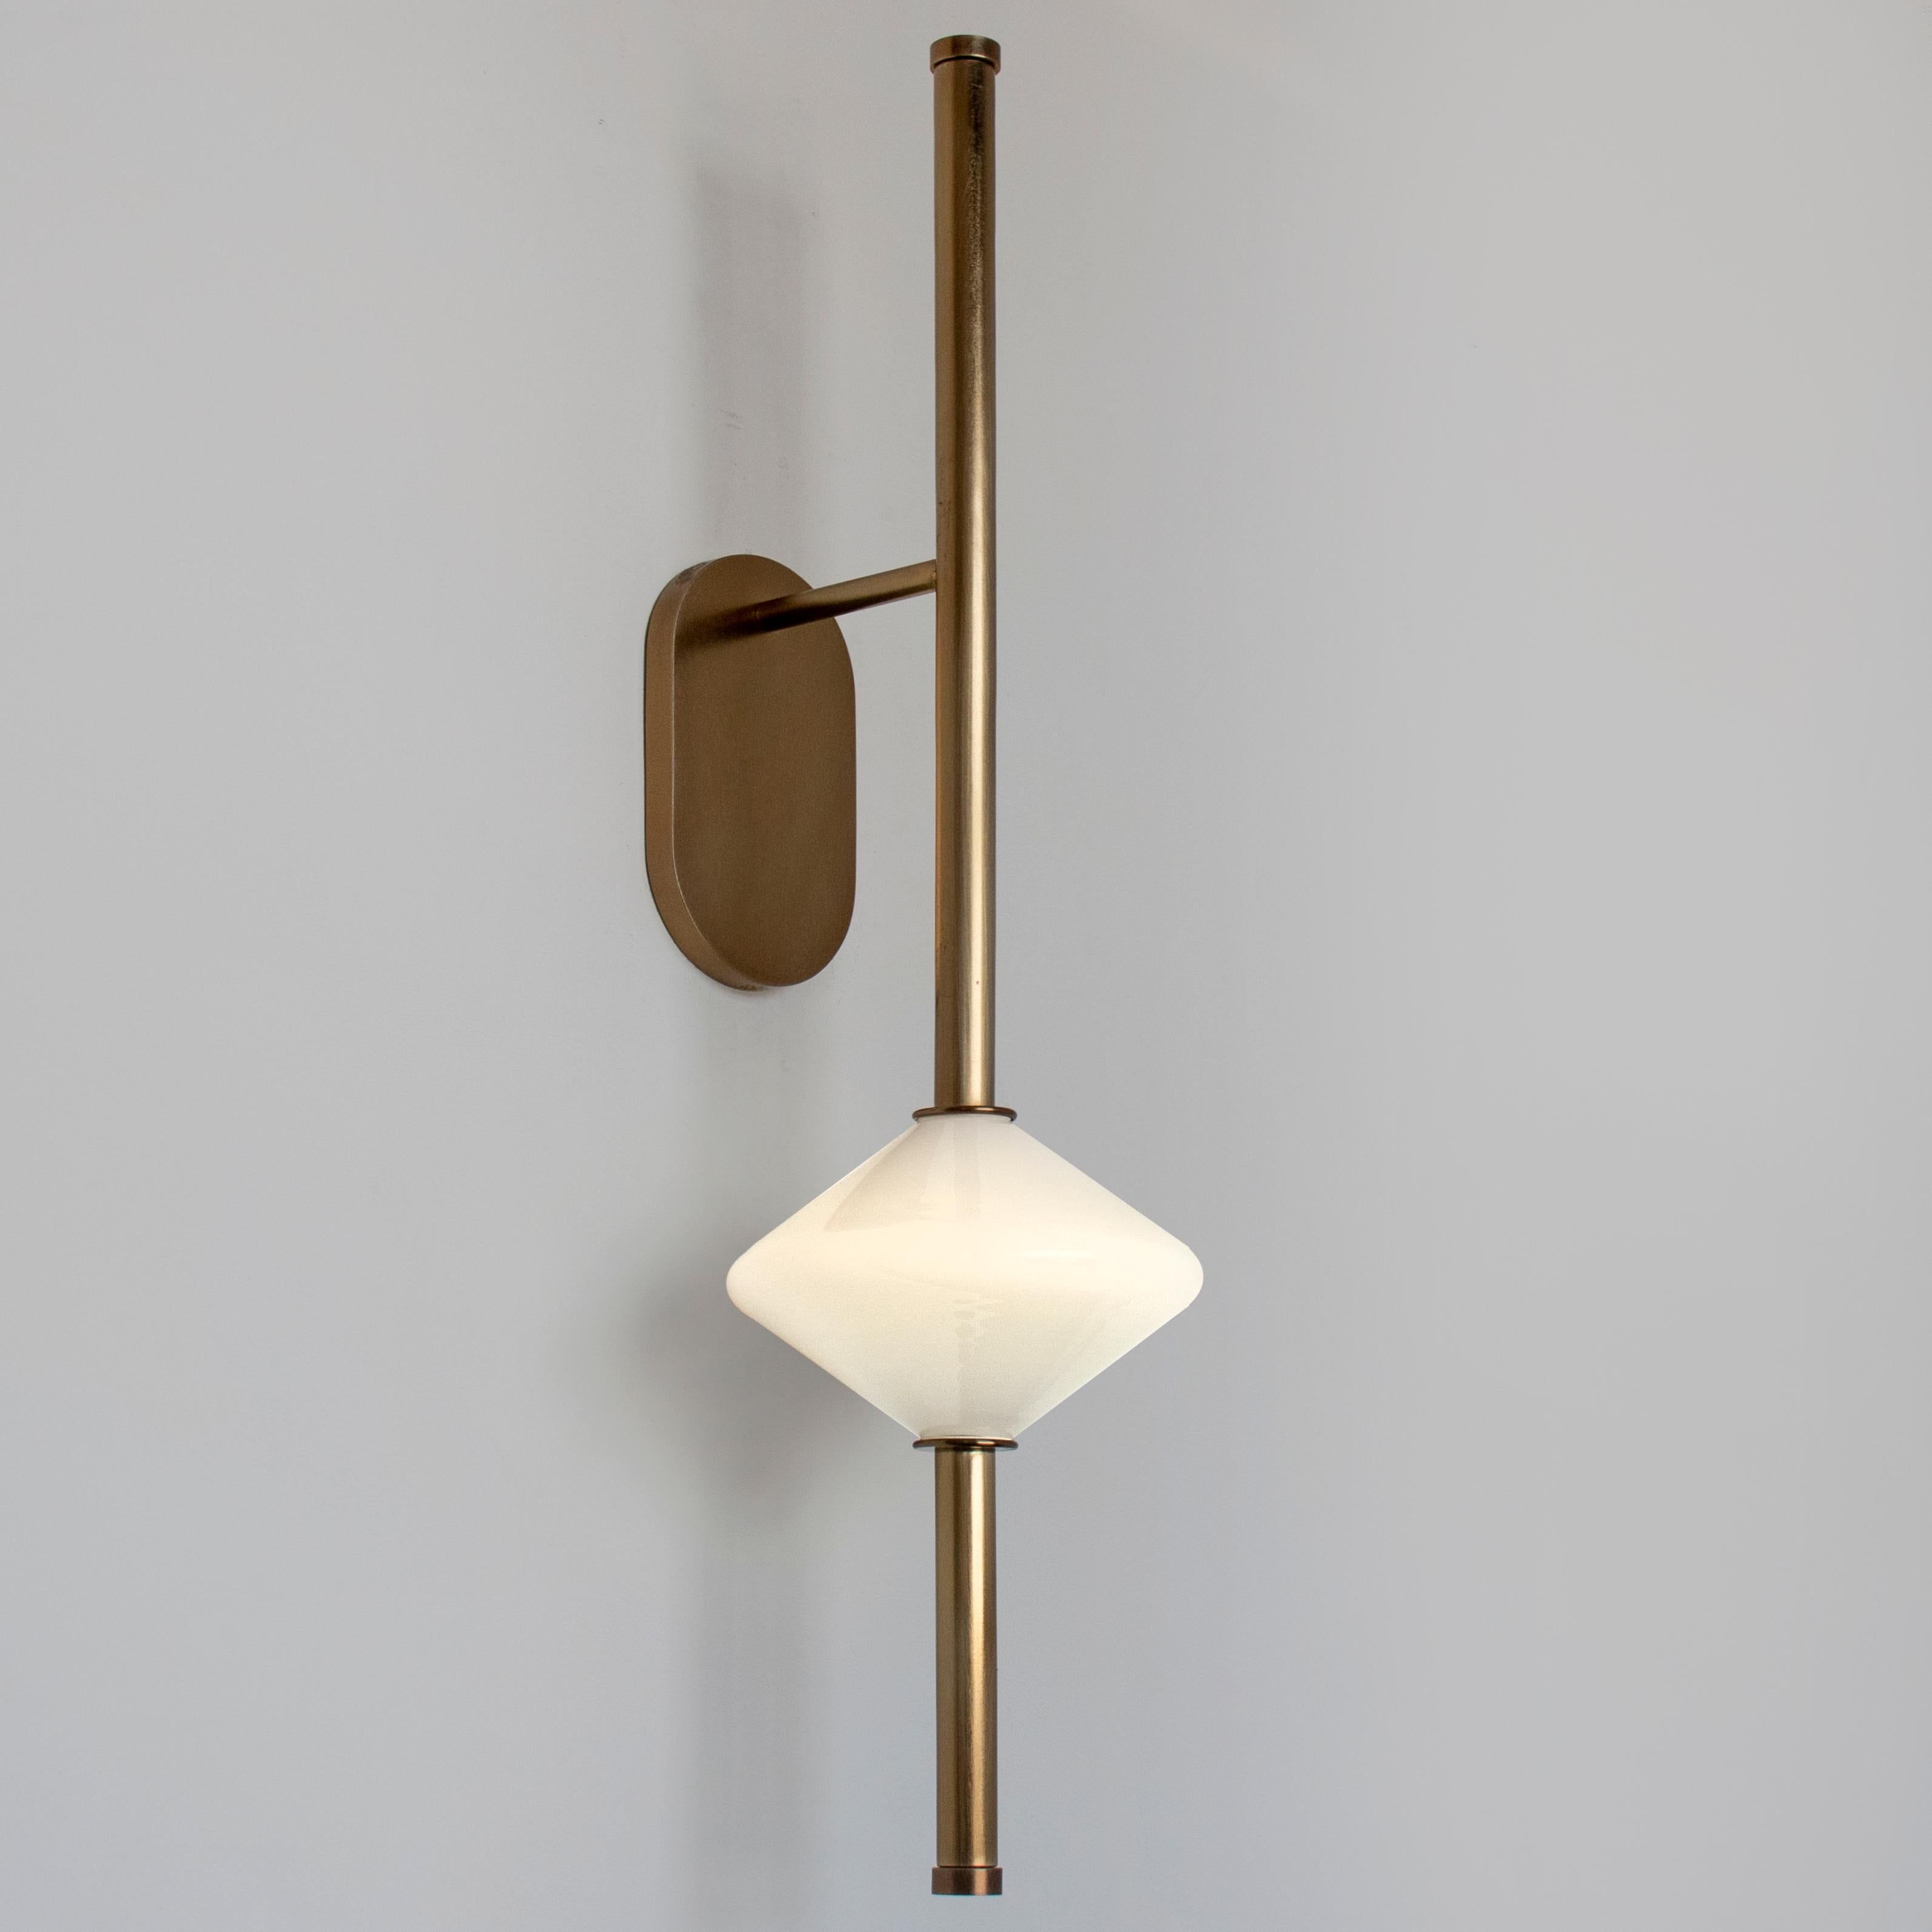 The GEM1 Wall Sconce is built of steel with an LED light source that is diffused by a hand-blown glass diffuser inspired by the shape of an abacus bead. This variation on the Gem Sconce features a fixed positioned arm, making it suitable for high